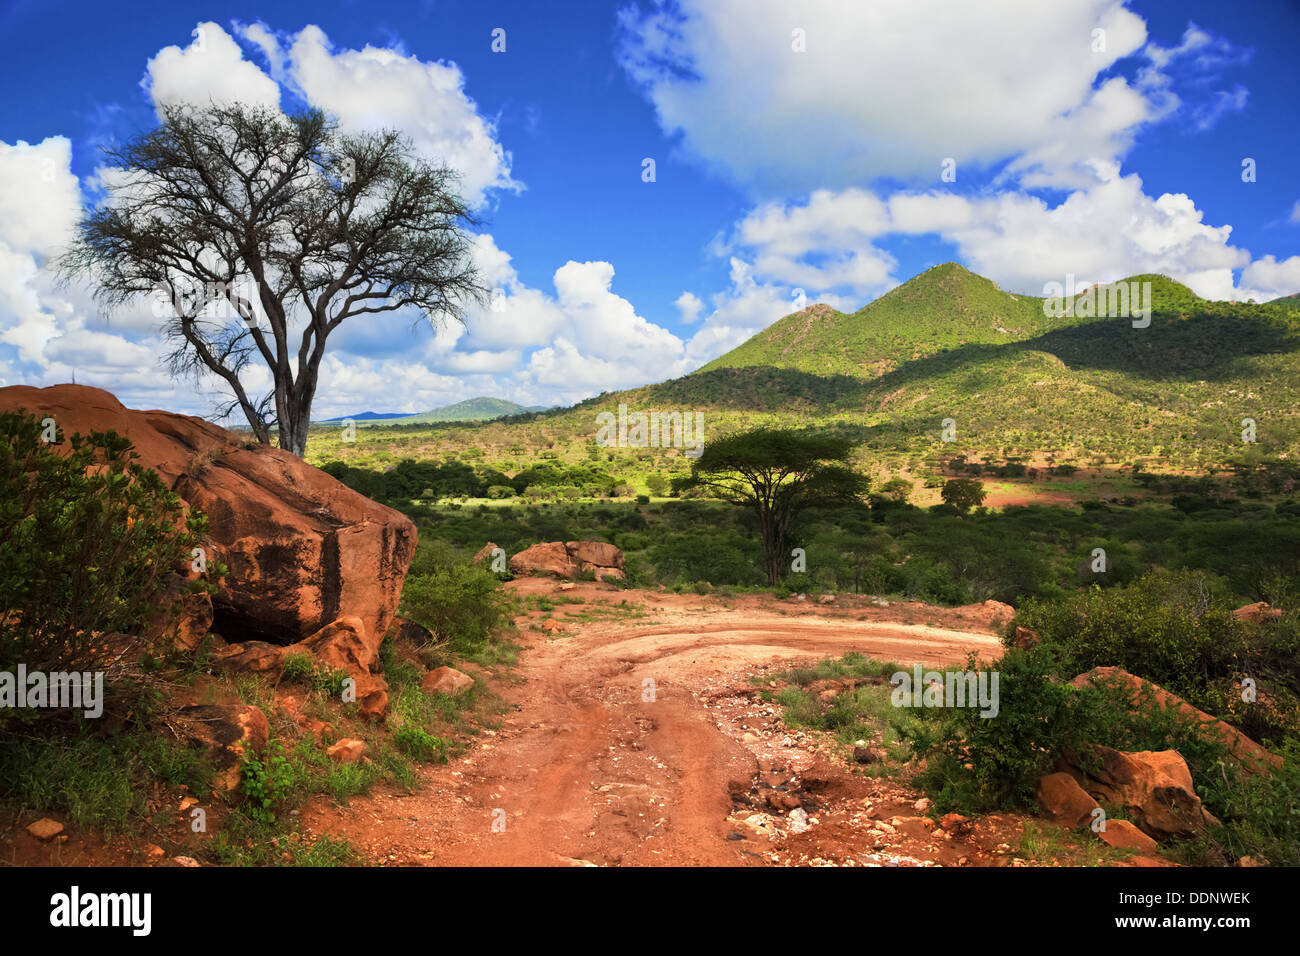 Red ground dirt road and bush with savanna landscape in Africa. Tsavo West, Kenya. Stock Photo